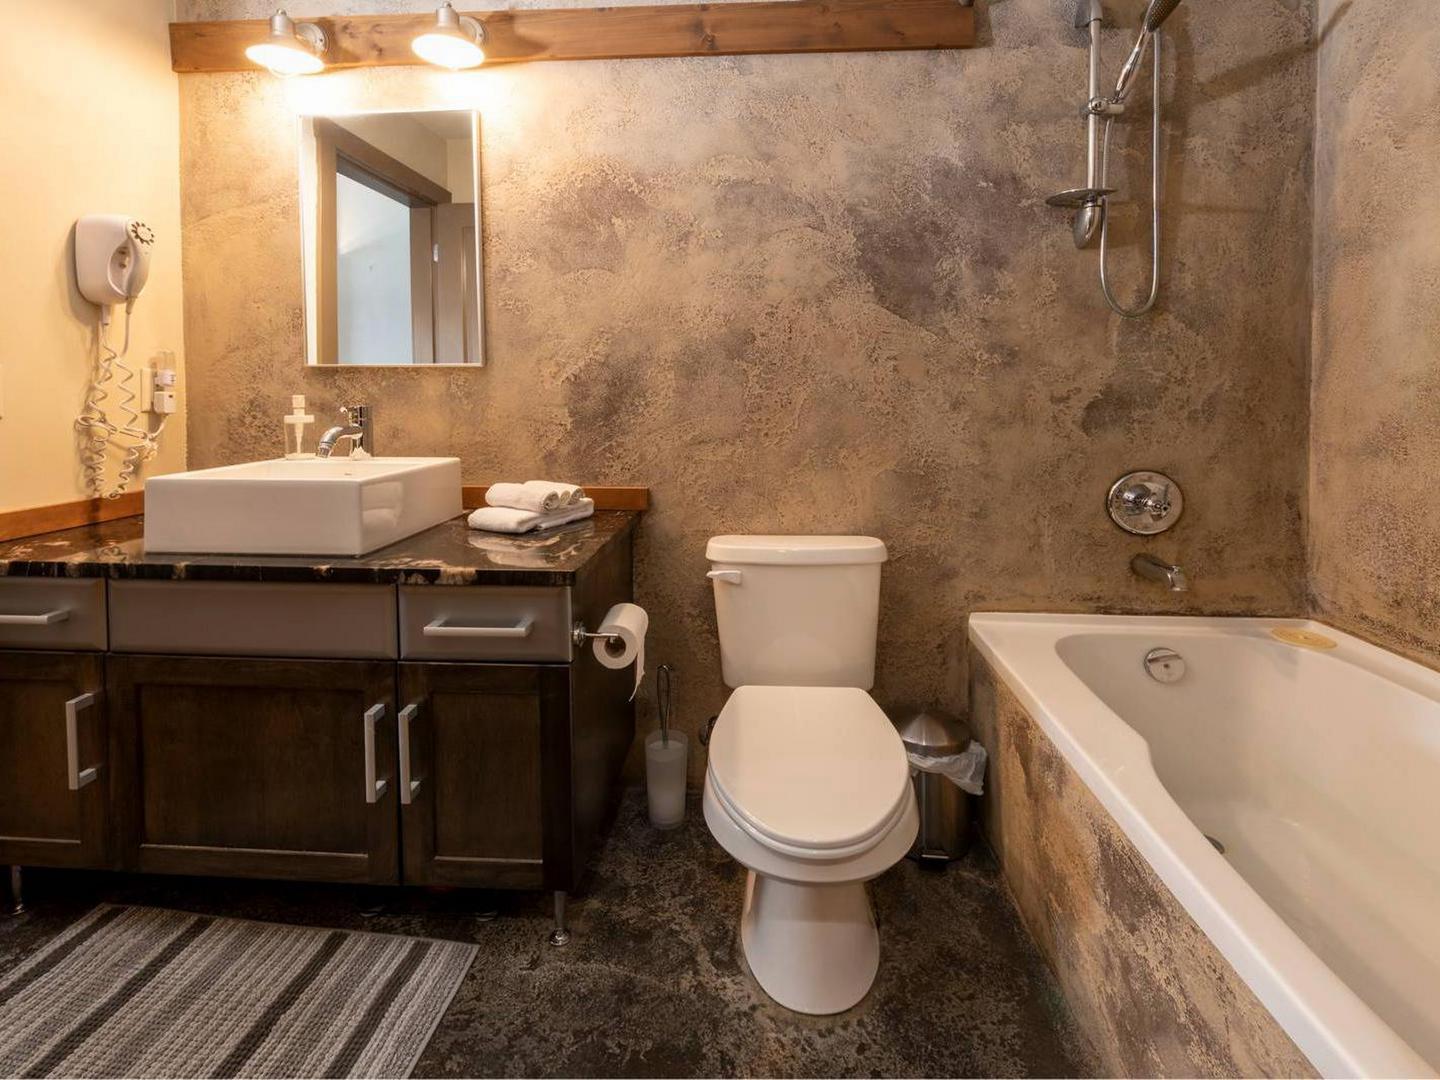 Timbers Penthouse Level condo rental luxury spa like bathroom with dark stone tile and a large soaker tub, managed by Luxury Mountain Vacation Rentals at Big White Ski Resort.